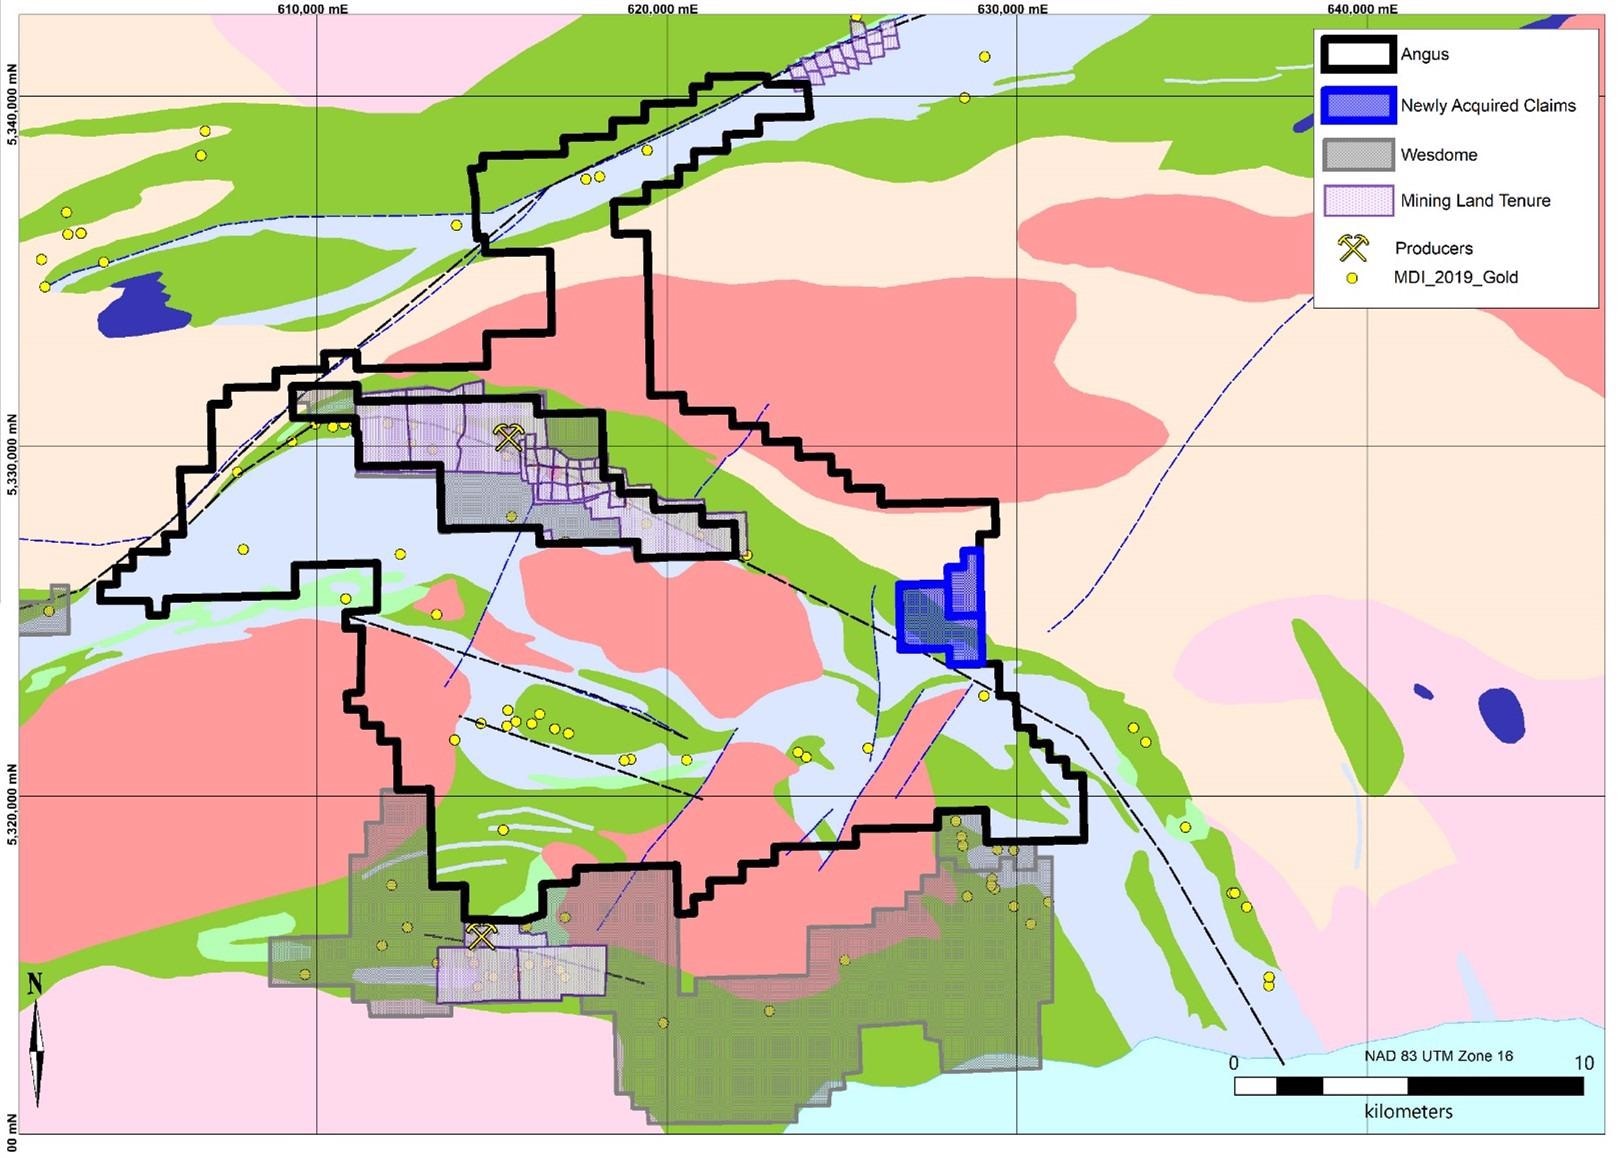 Angus Gold Completes Acquisition of a 100% Interest in Key Mineral Claims Adjacent to the Golden Sky Project.